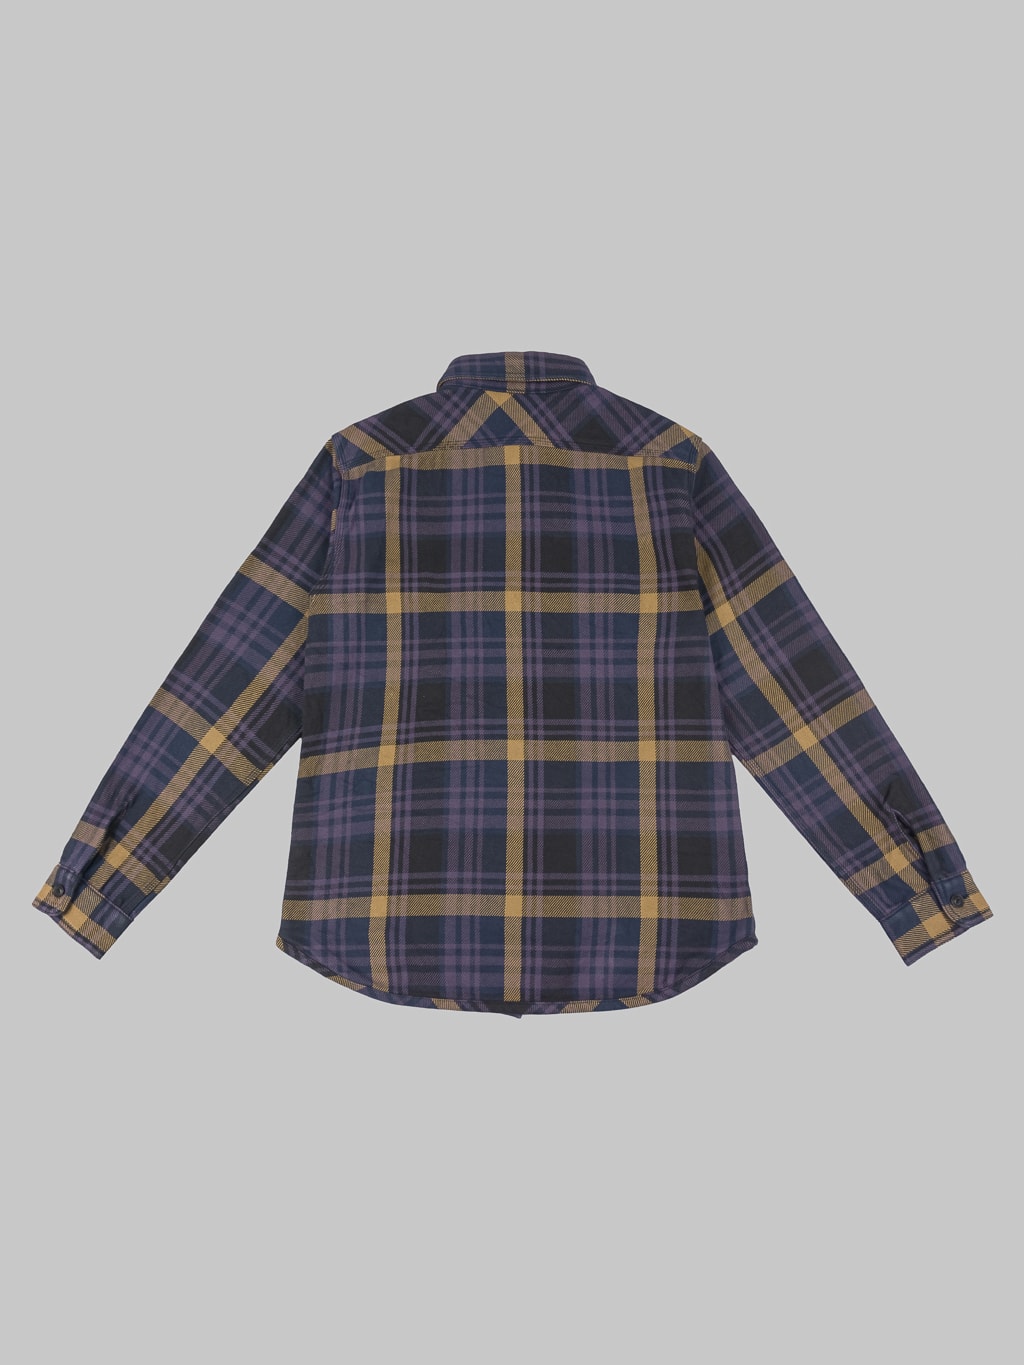 ues extra heavy selvedge flannel shirt navy back